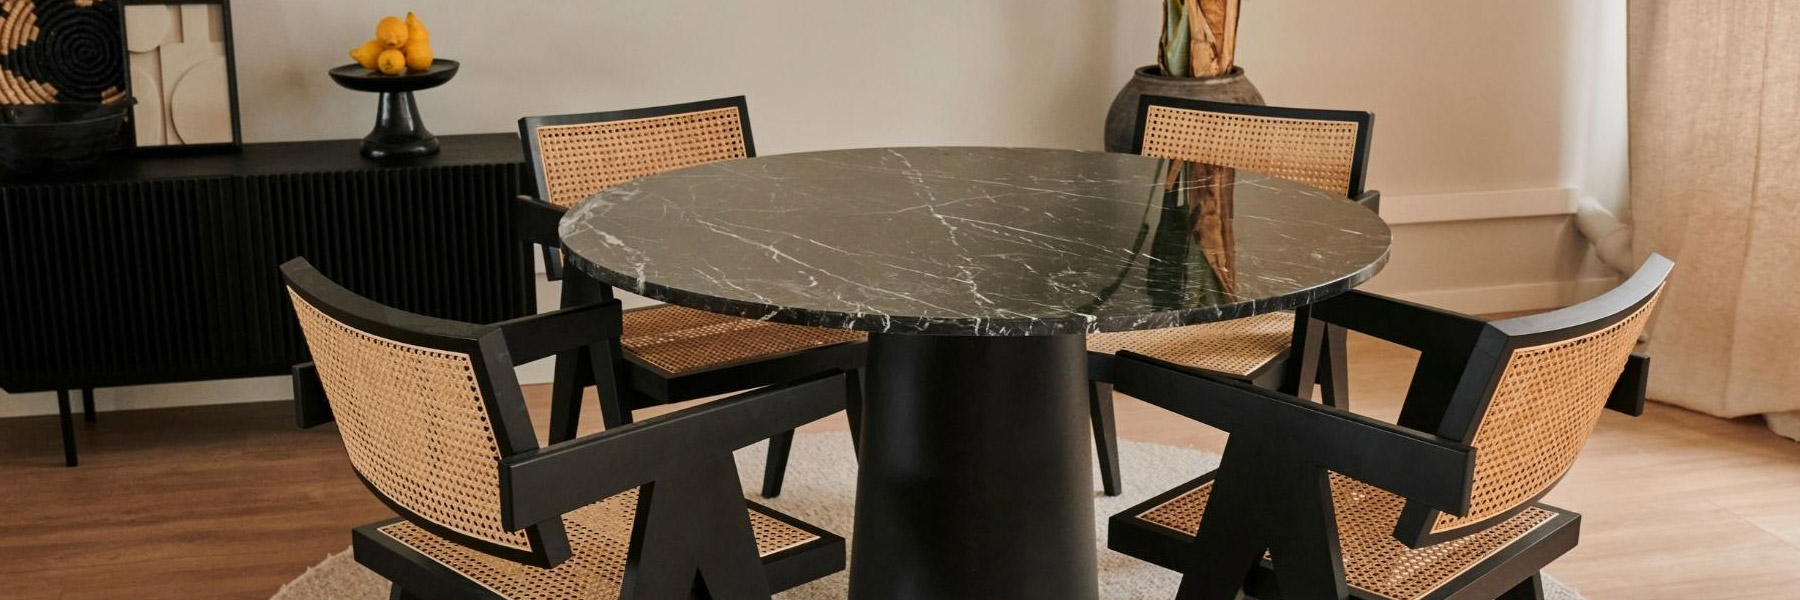 Popular: round marble dining tables